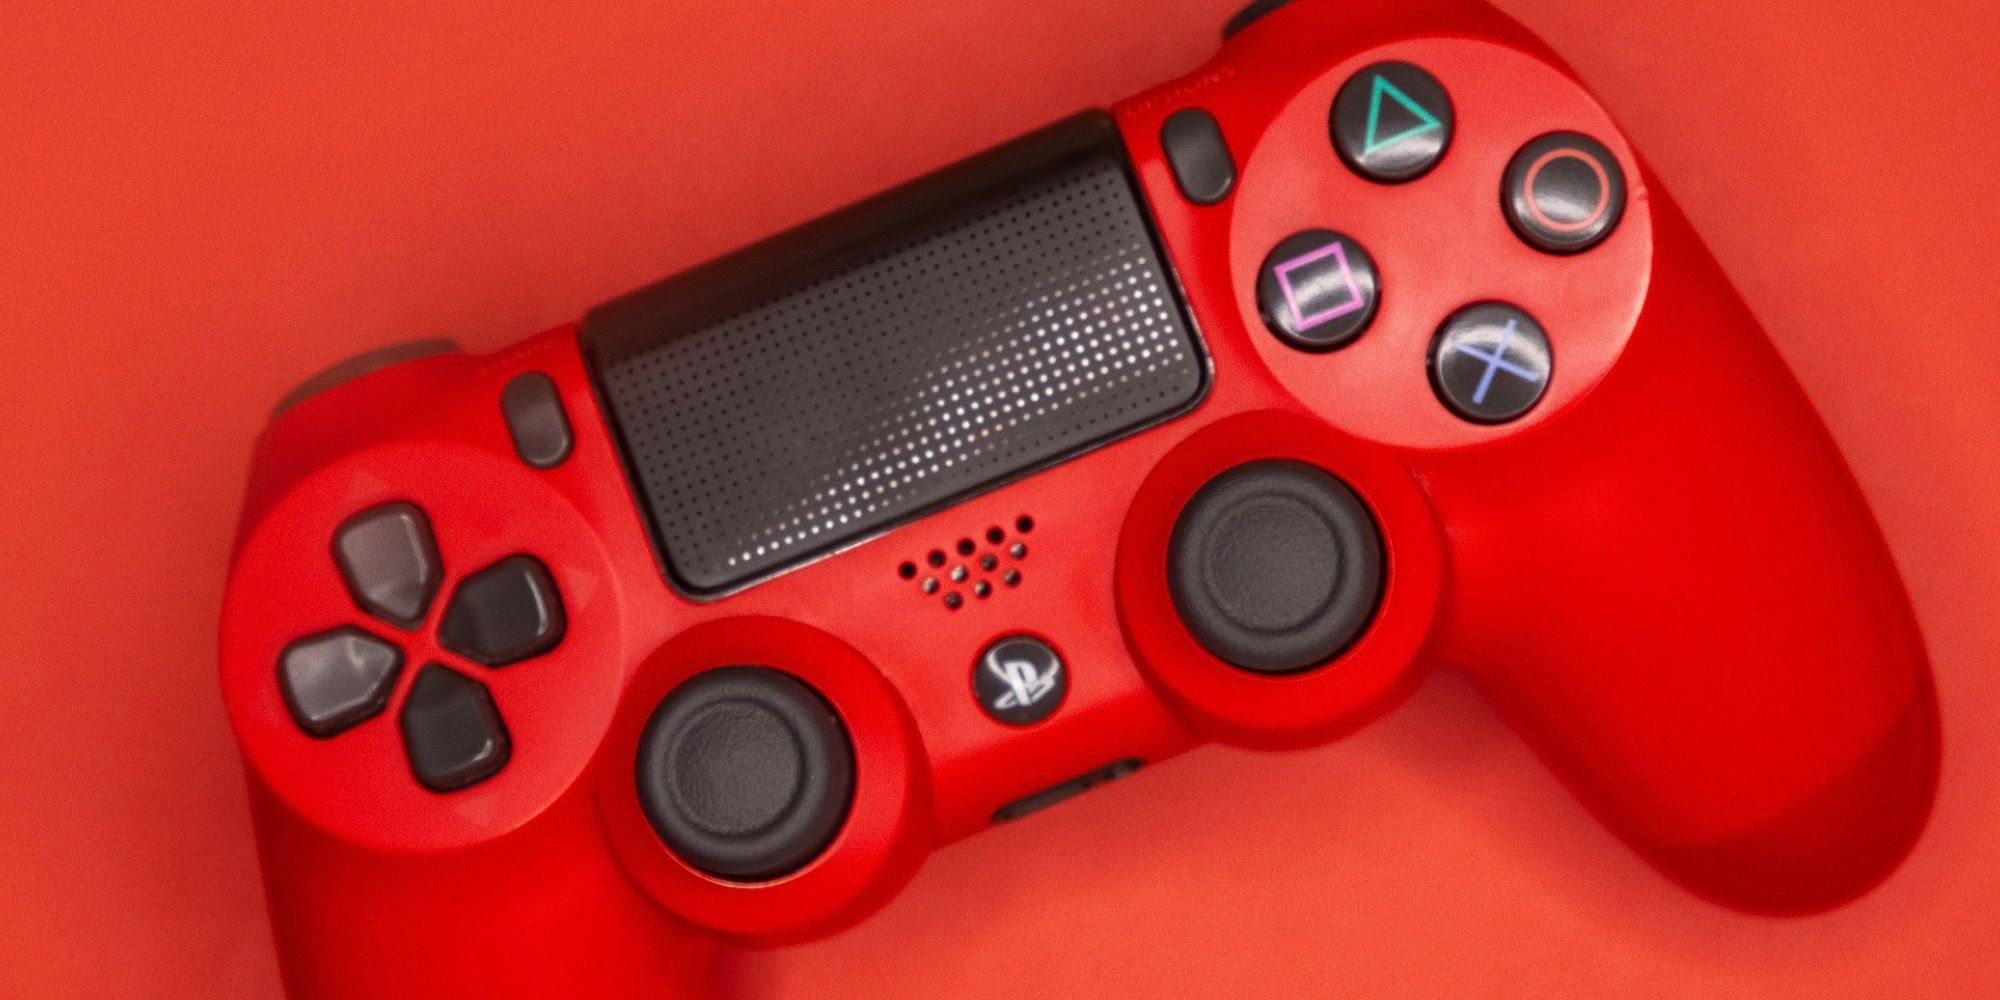 cool looking ps4 controllers